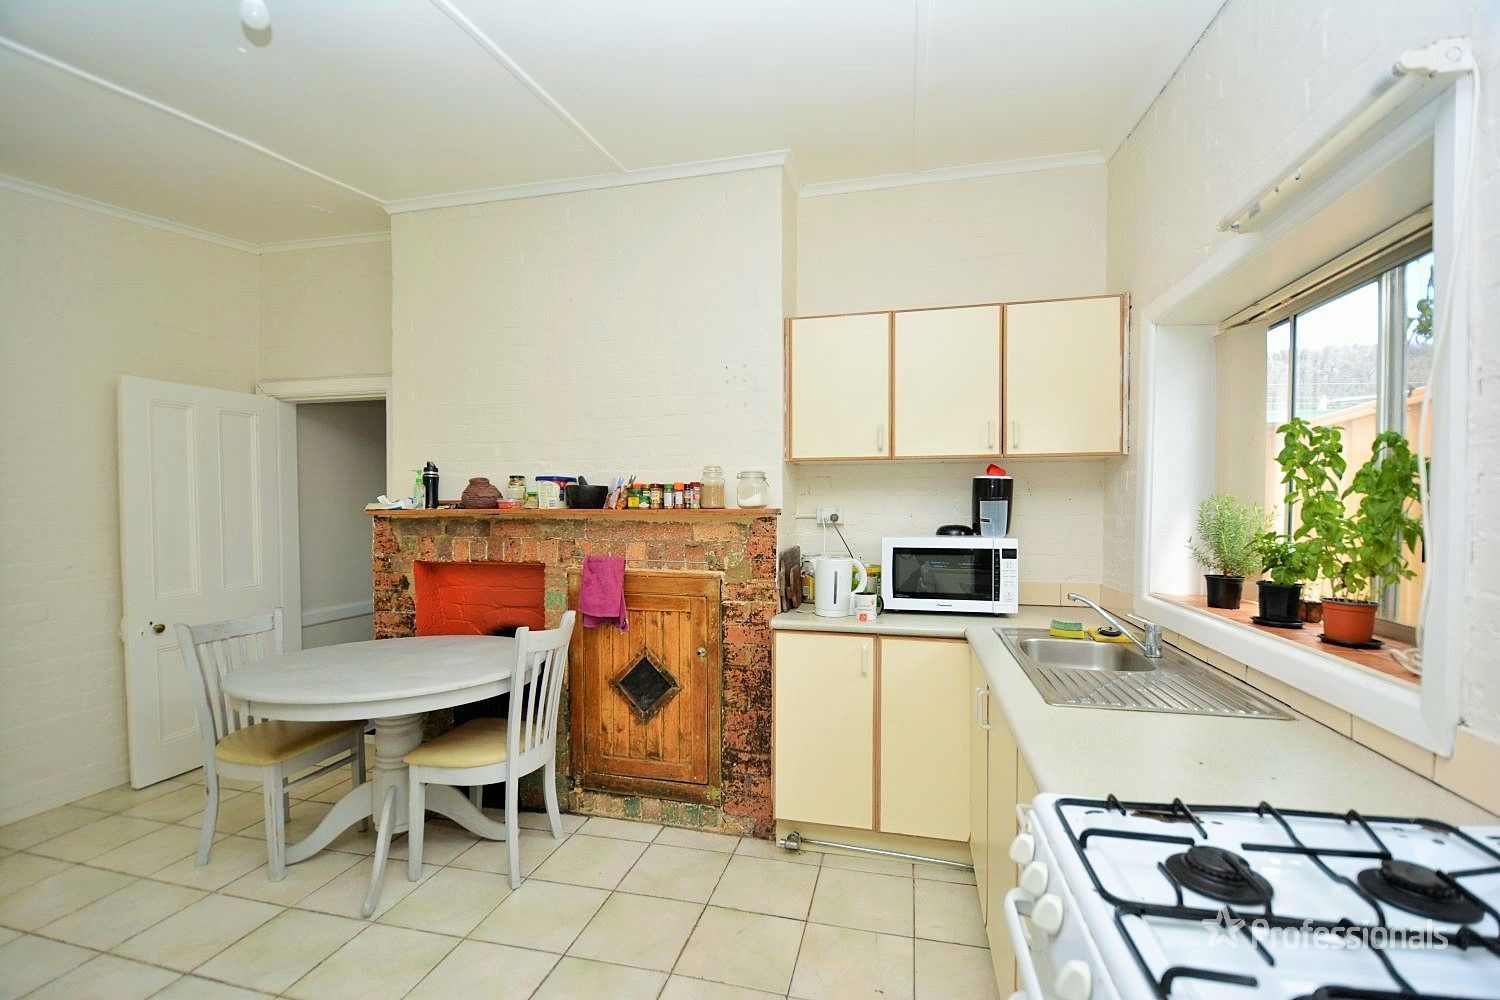 71 Inch Street, Lithgow NSW 2790, Image 2